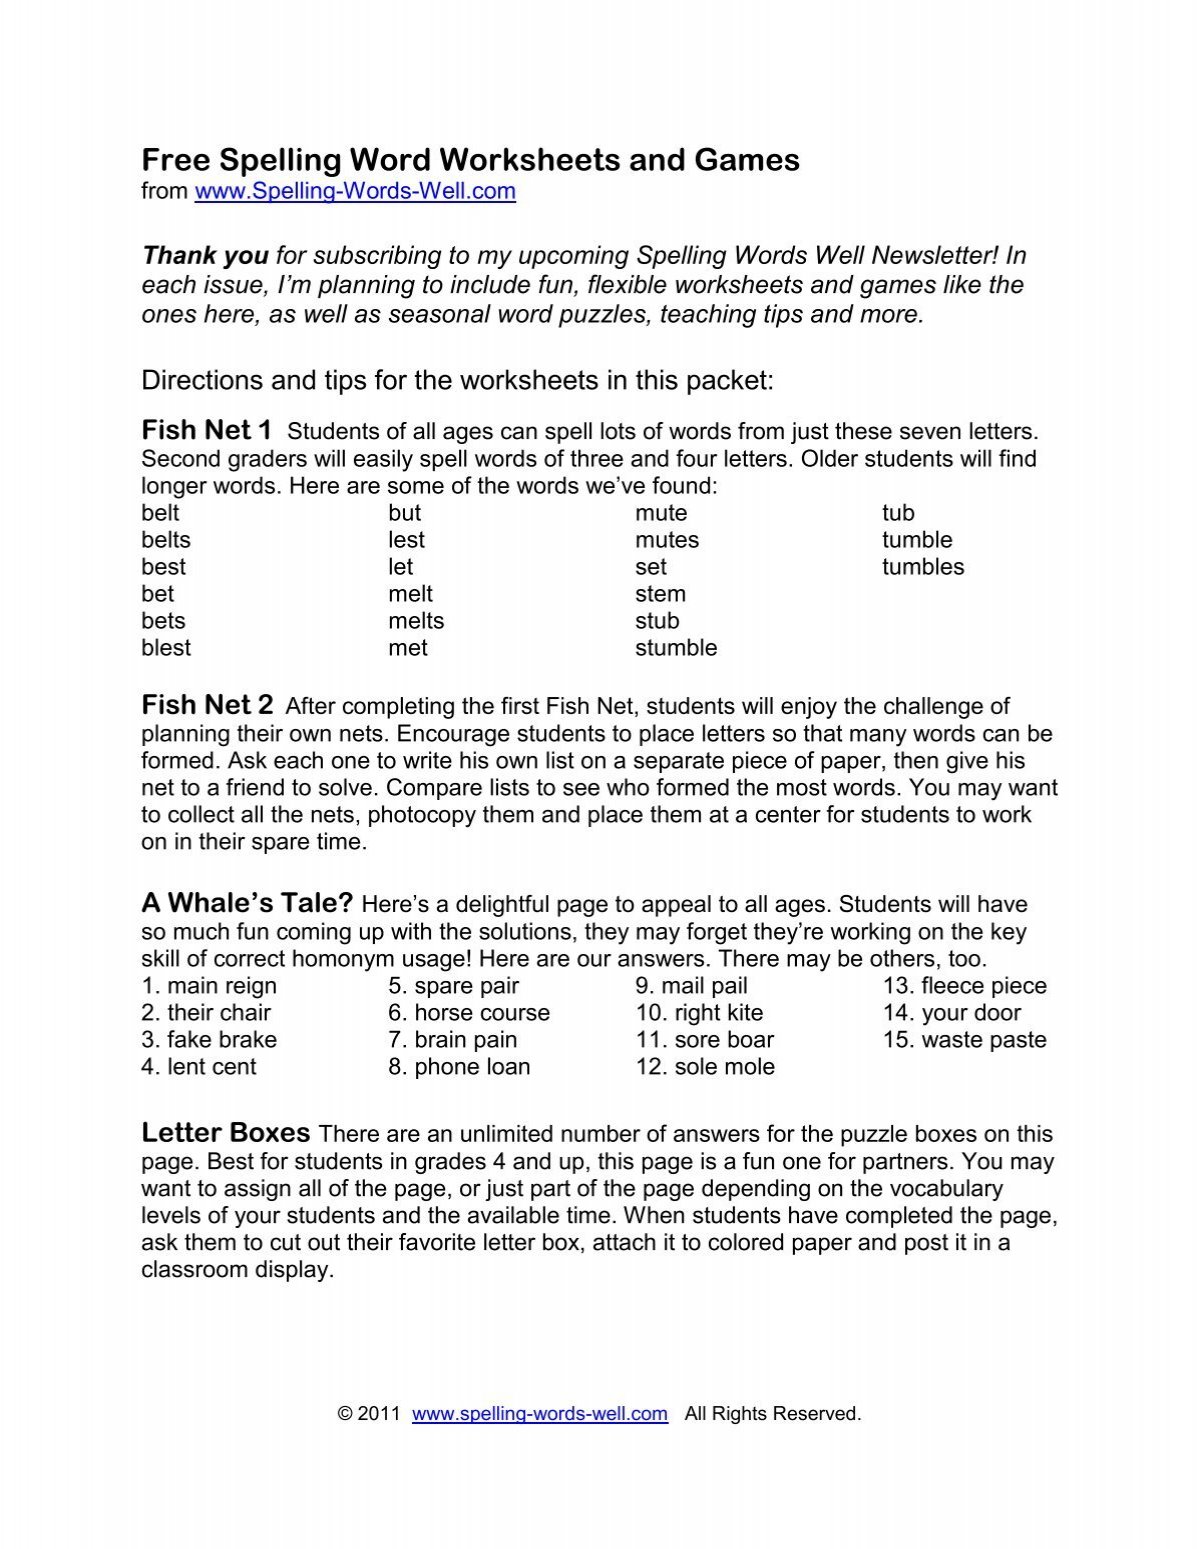 free-spelling-word-worksheets-and-games-spelling-words-well